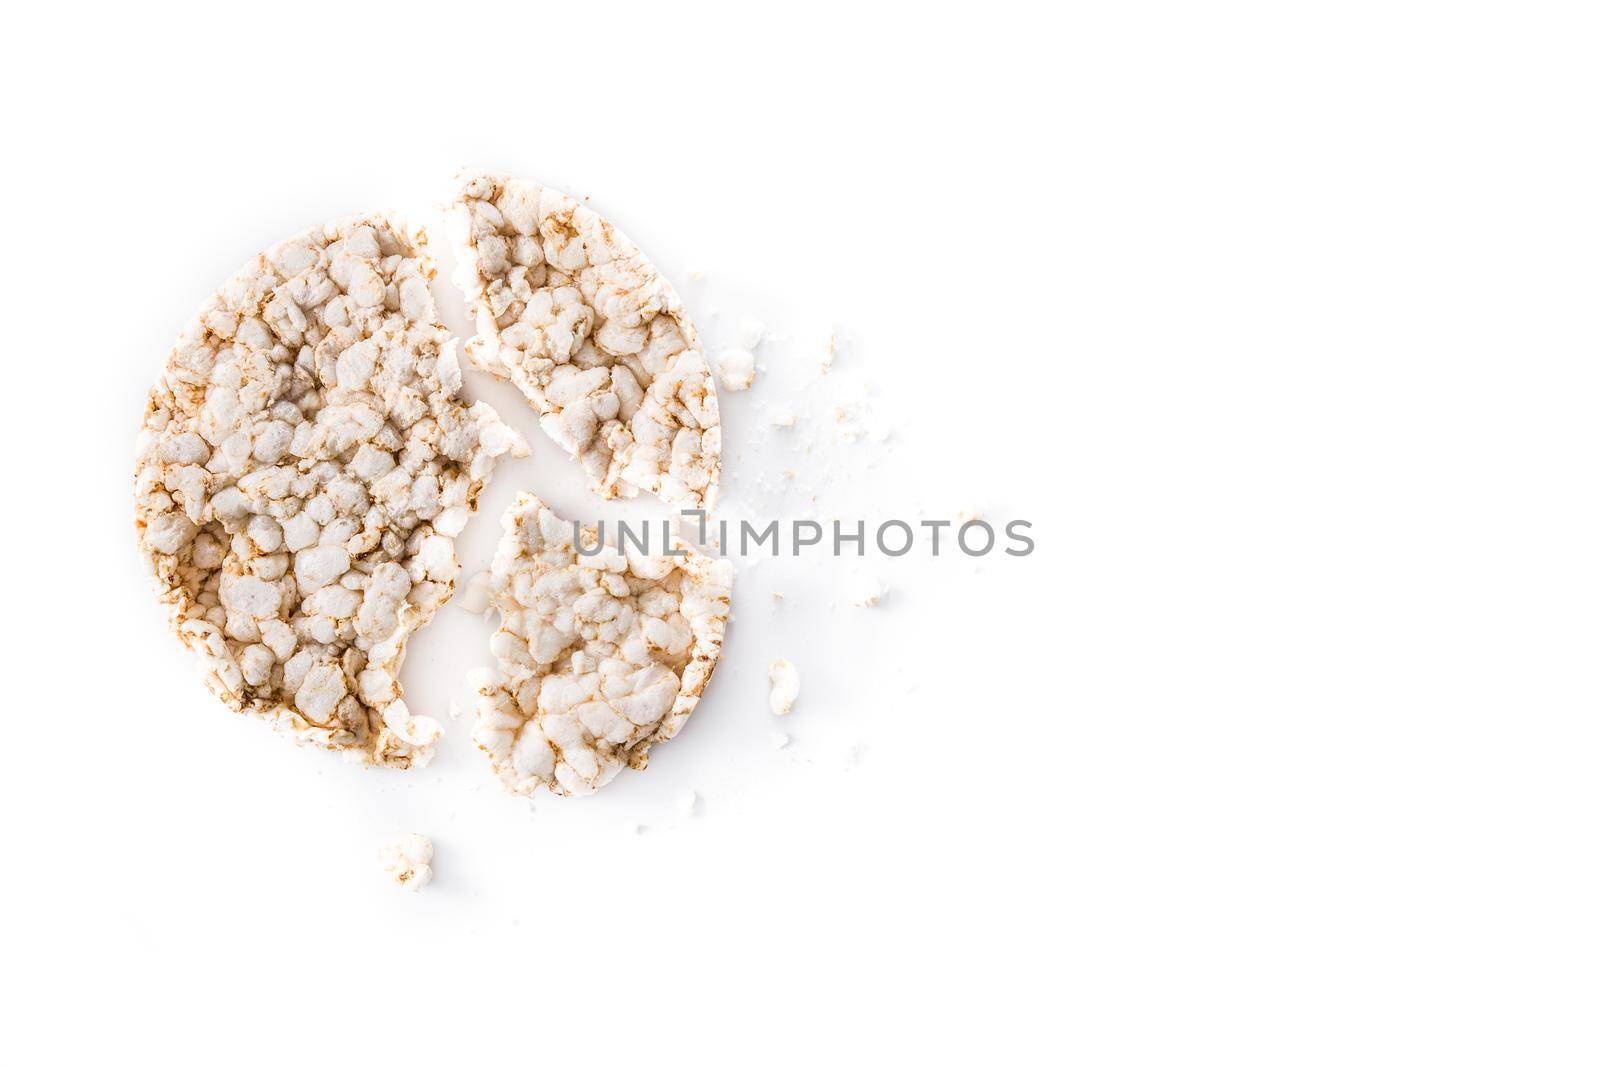 Pile of puffed rice cake by chandlervid85